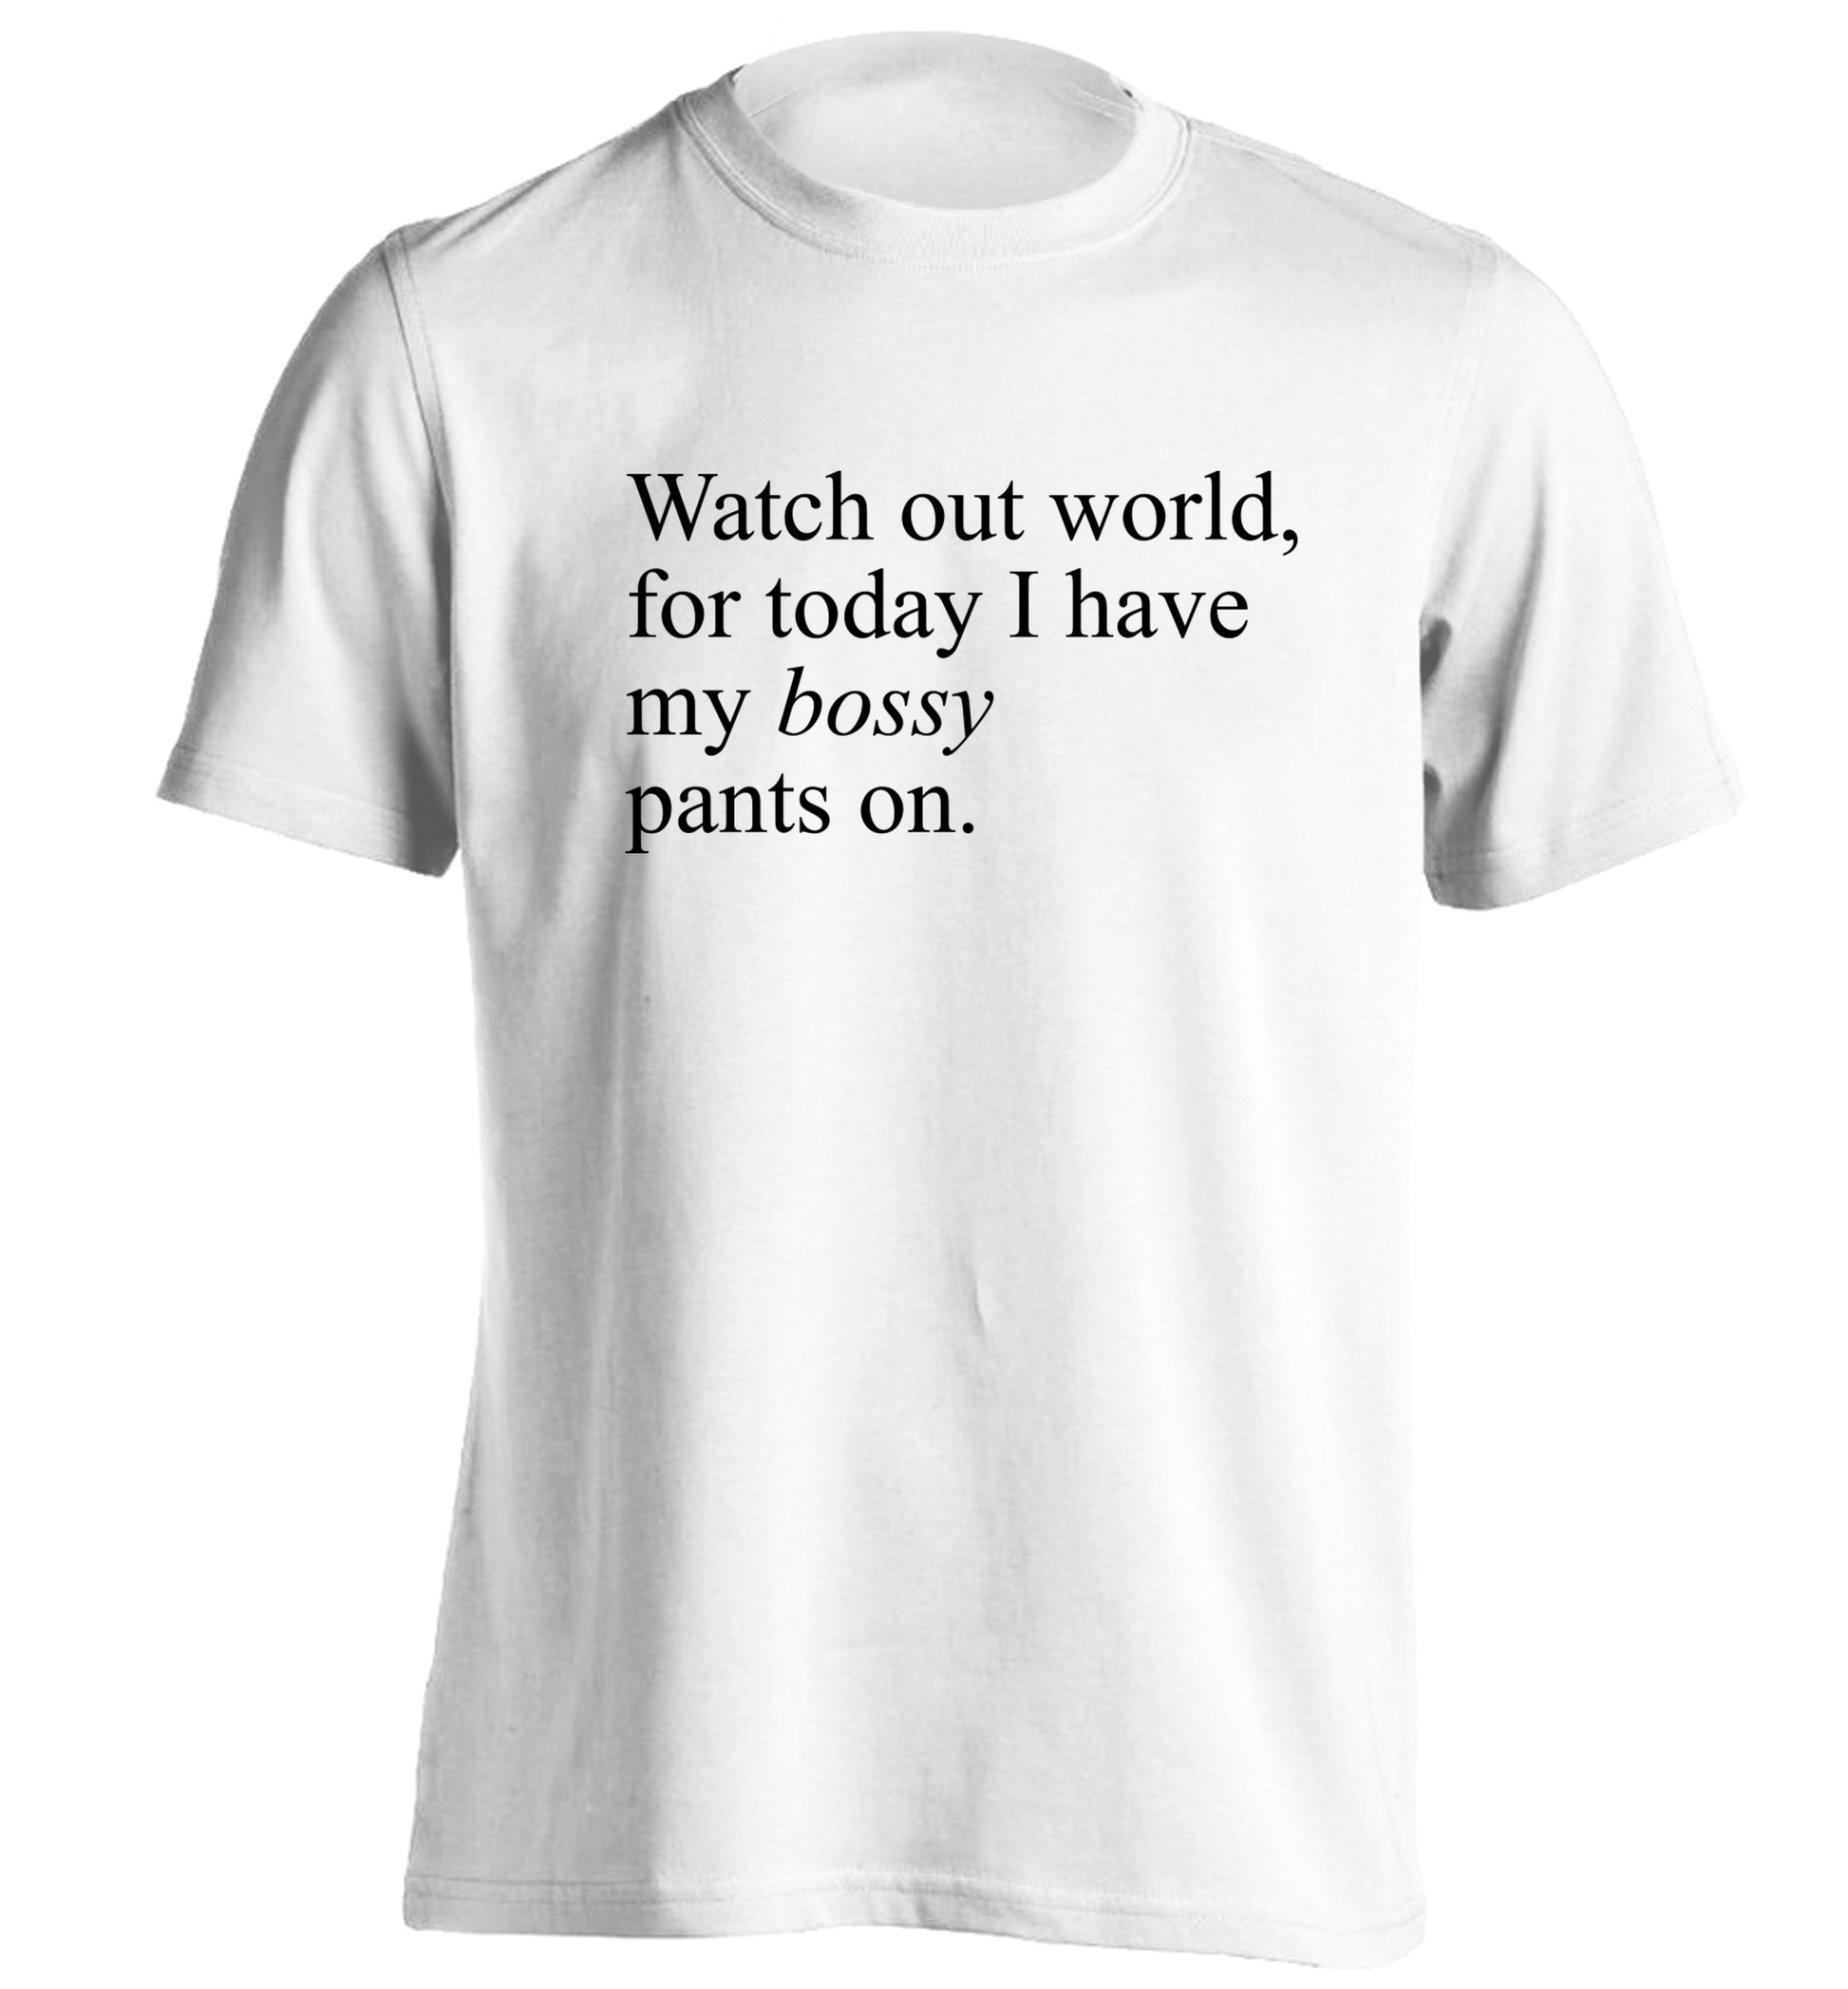 Watch out world, for today I have my bossy pants on adults unisex white Tshirt 2XL